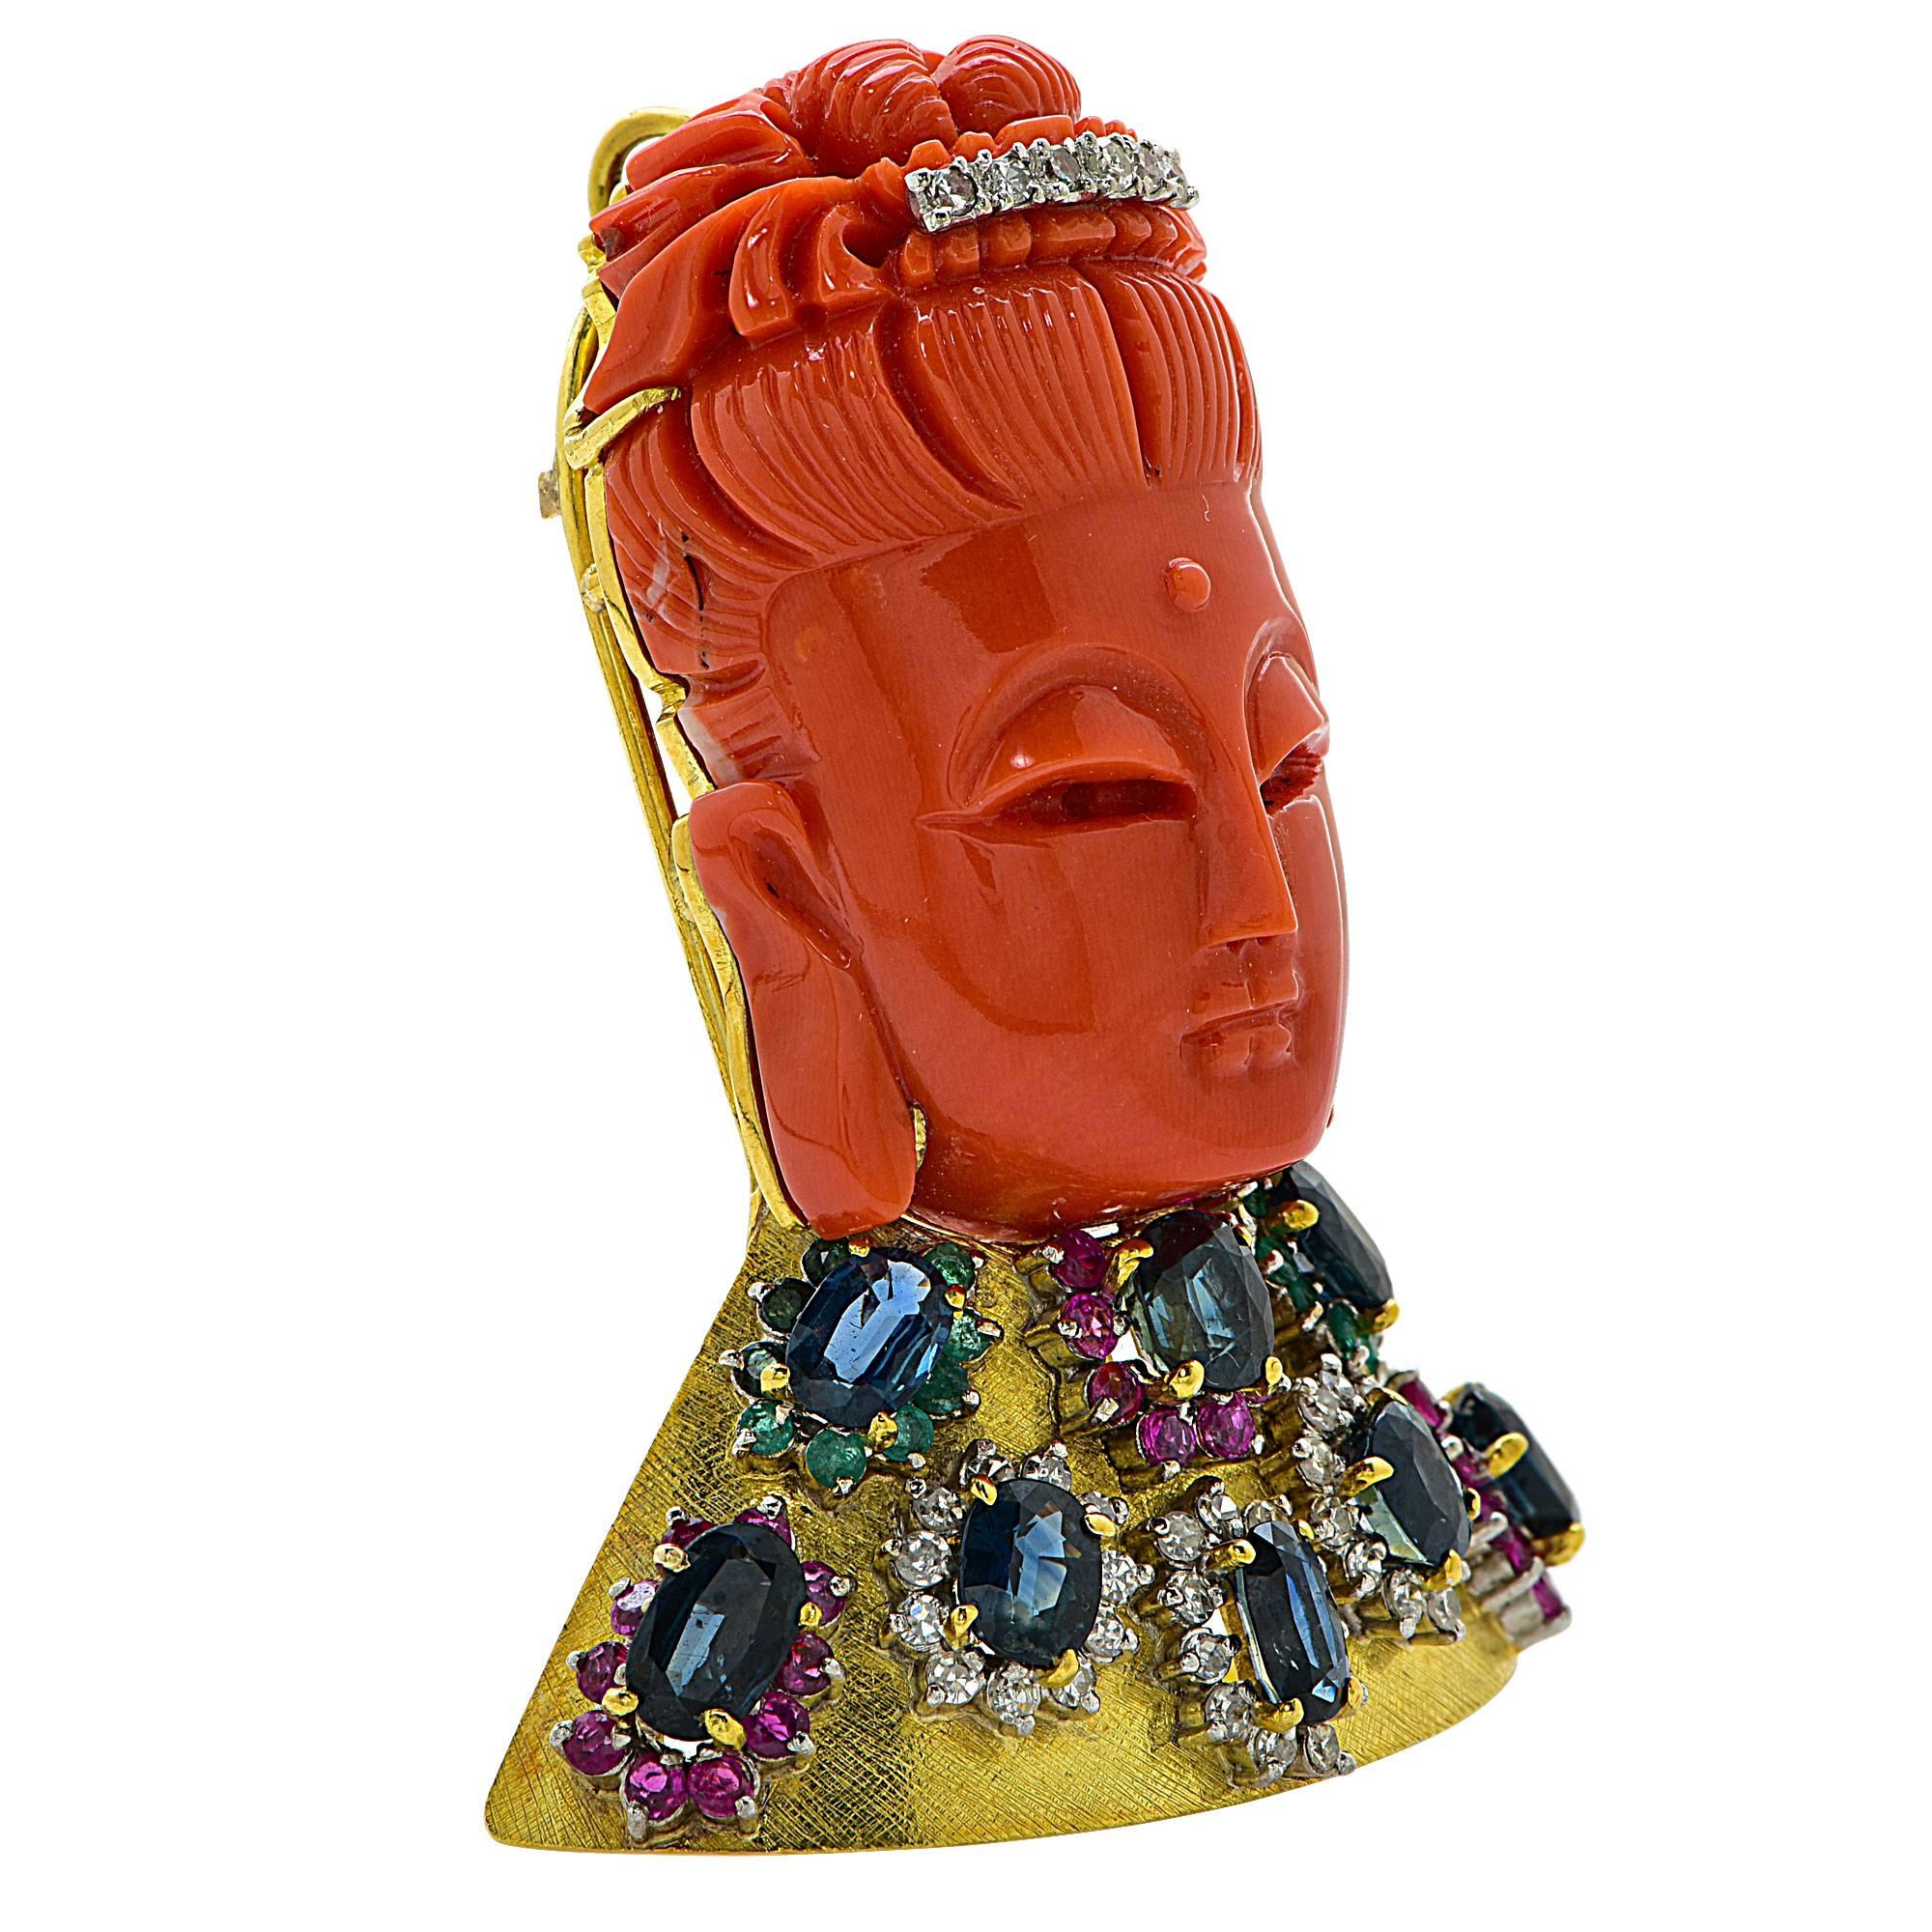 18k yellow gold brooch featuring a carved coral happy Buddha, accented by 9 oval cut sapphires weighing approximately 6cts total, 39 single cut diamonds weighing .60cts, 28 sapphires weighing .50cts total and 18 emeralds weighing .20cts